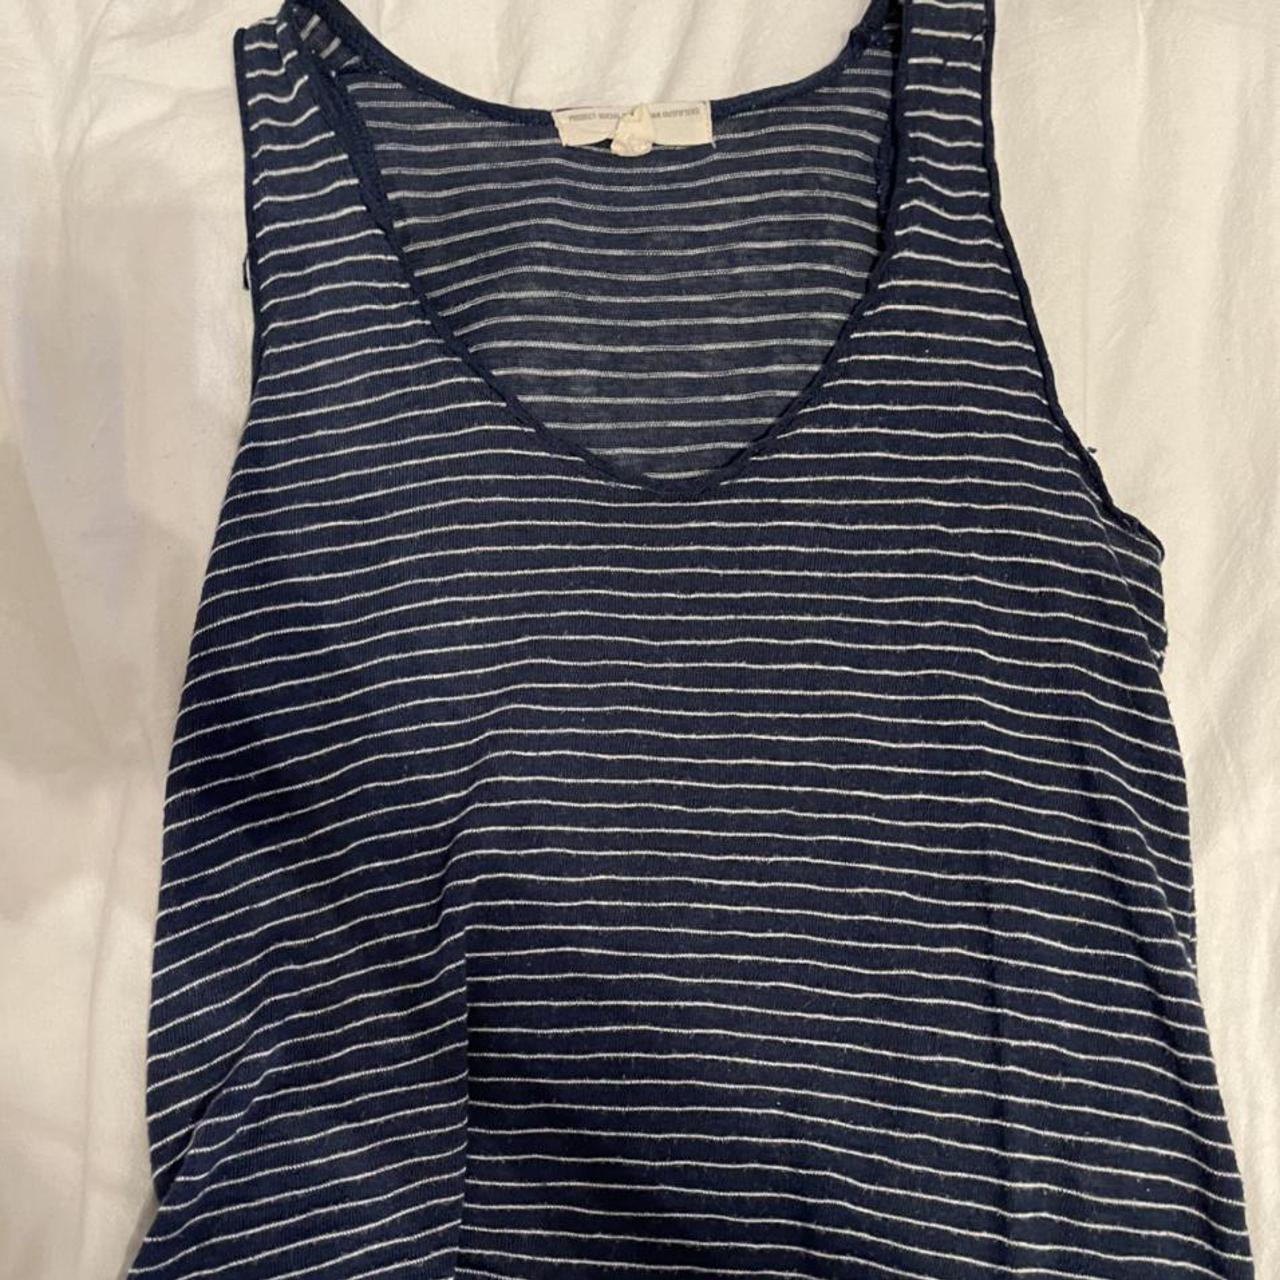 Product Image 1 - urban outfitters striped tank top.